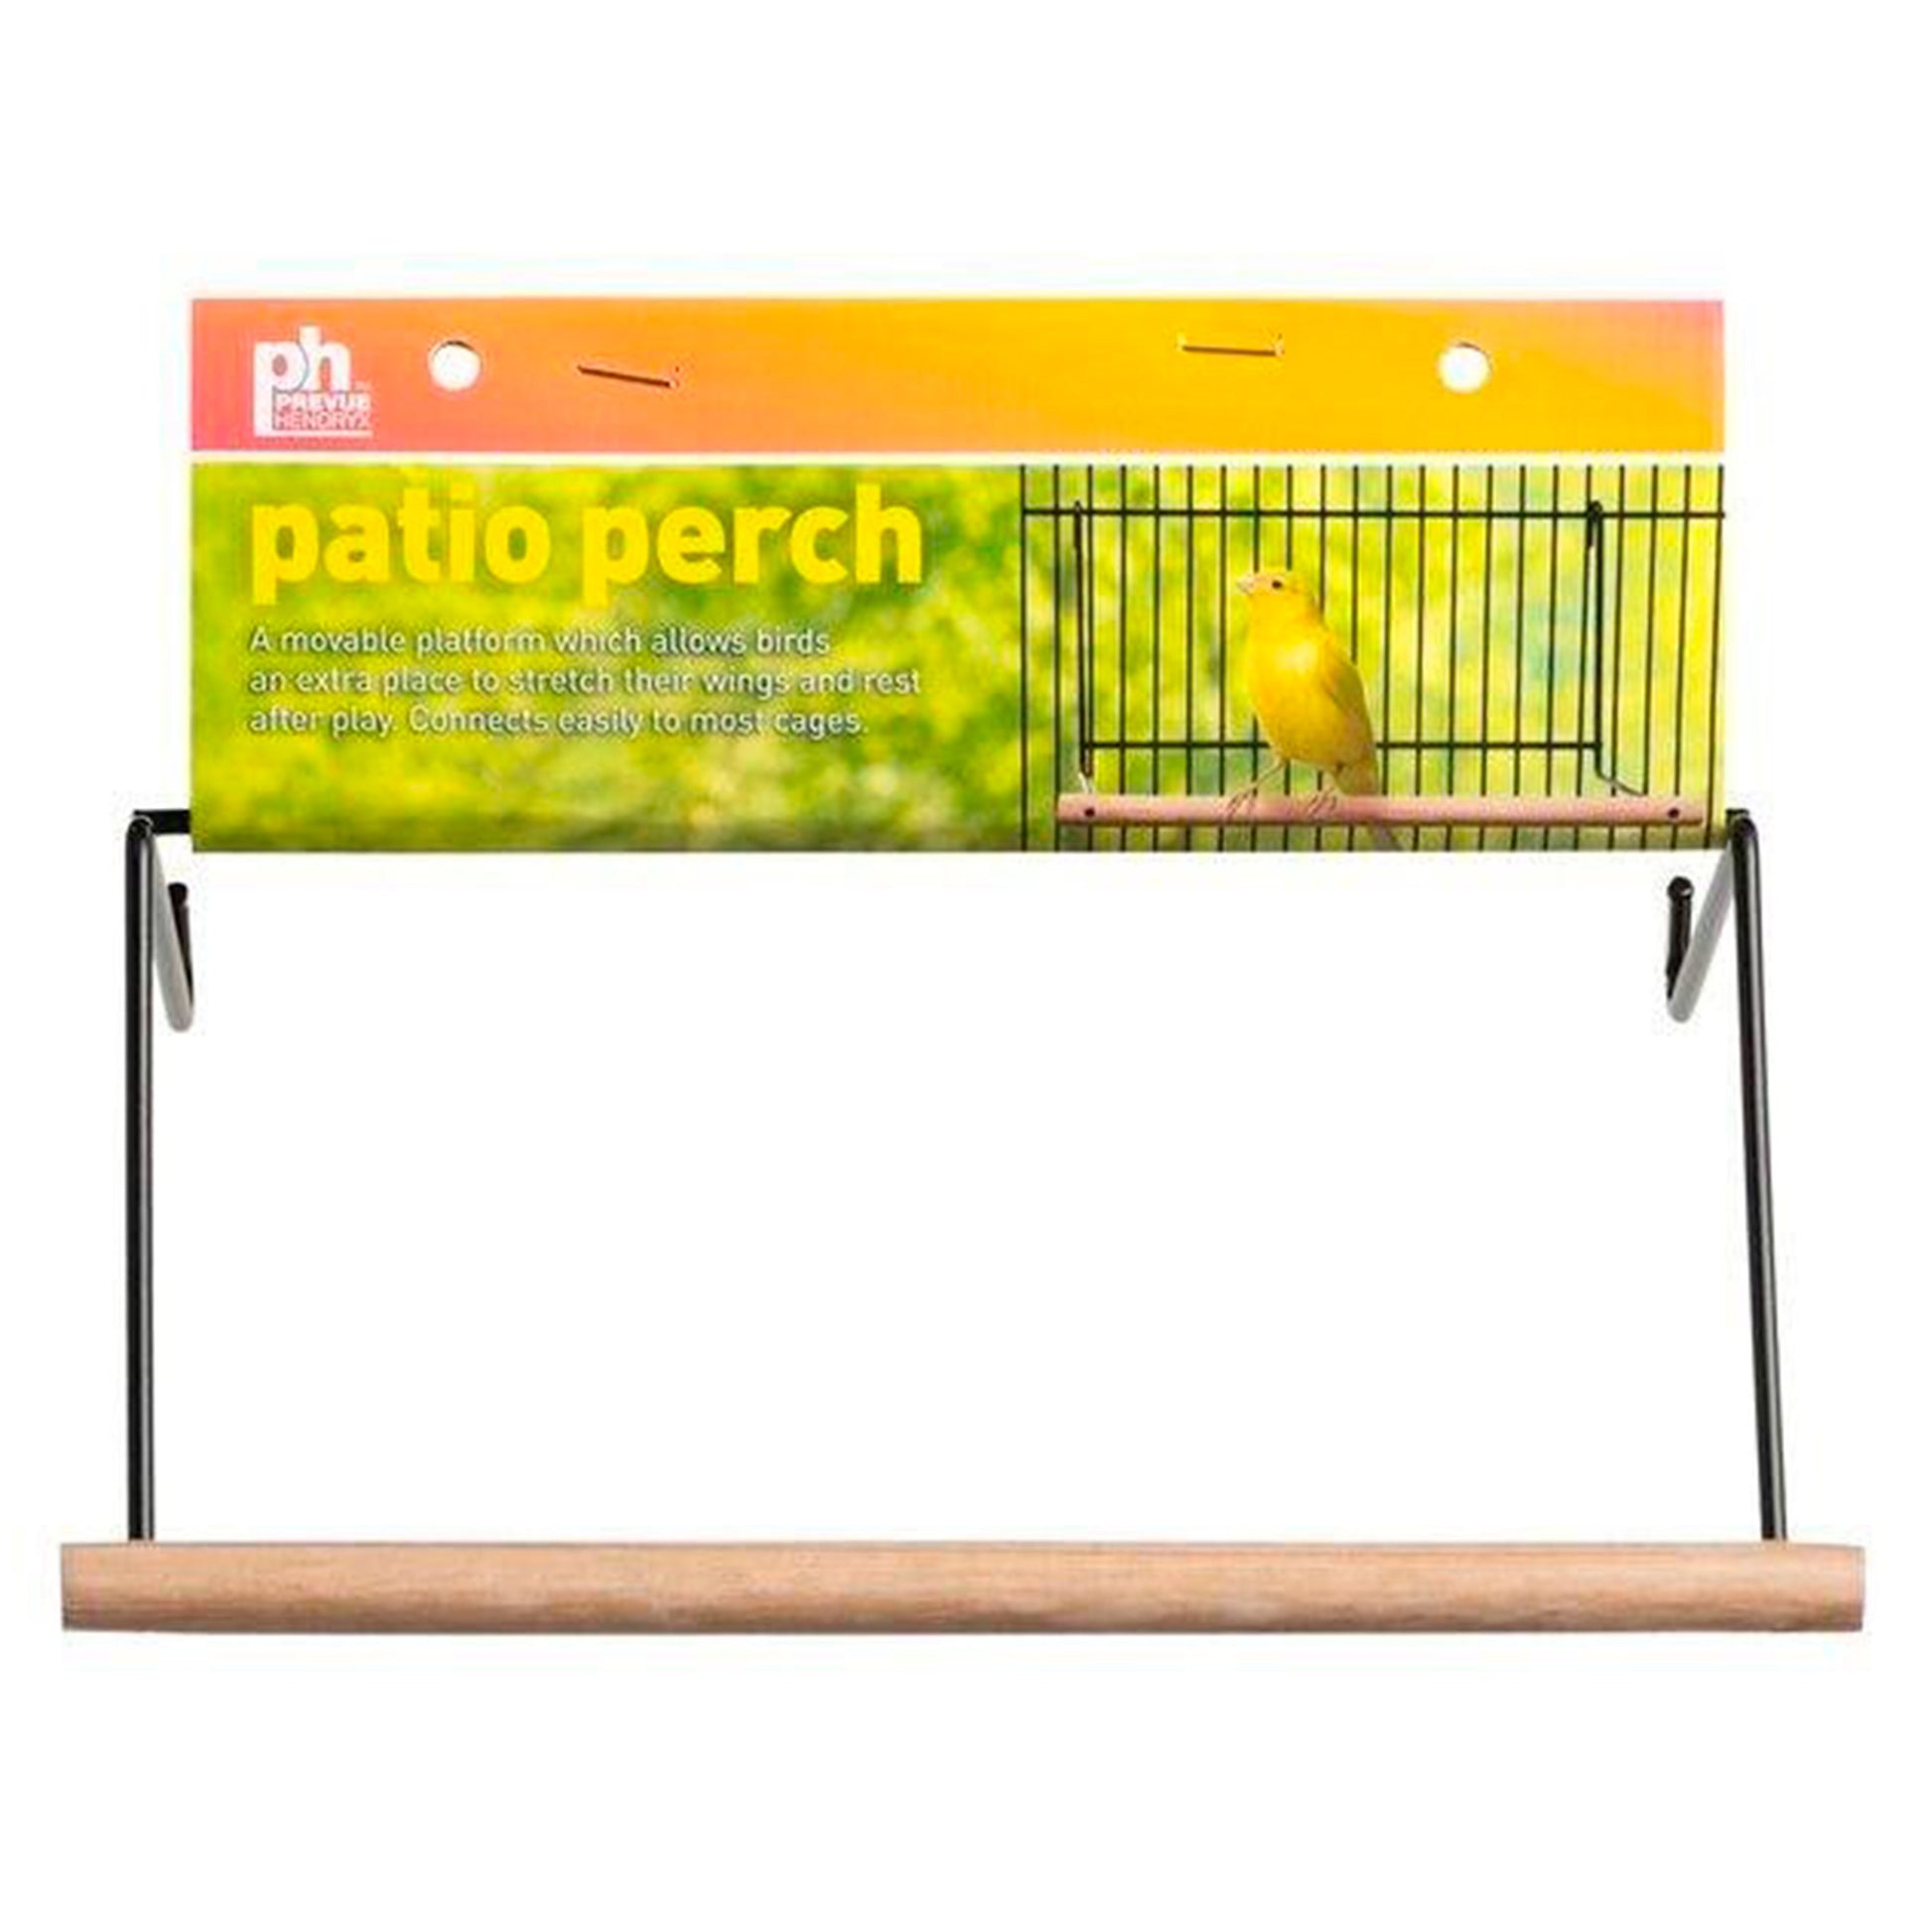 Prevue Pet Products Wood Patio Perch Brown 8 in, Small, Prevue Pet Products